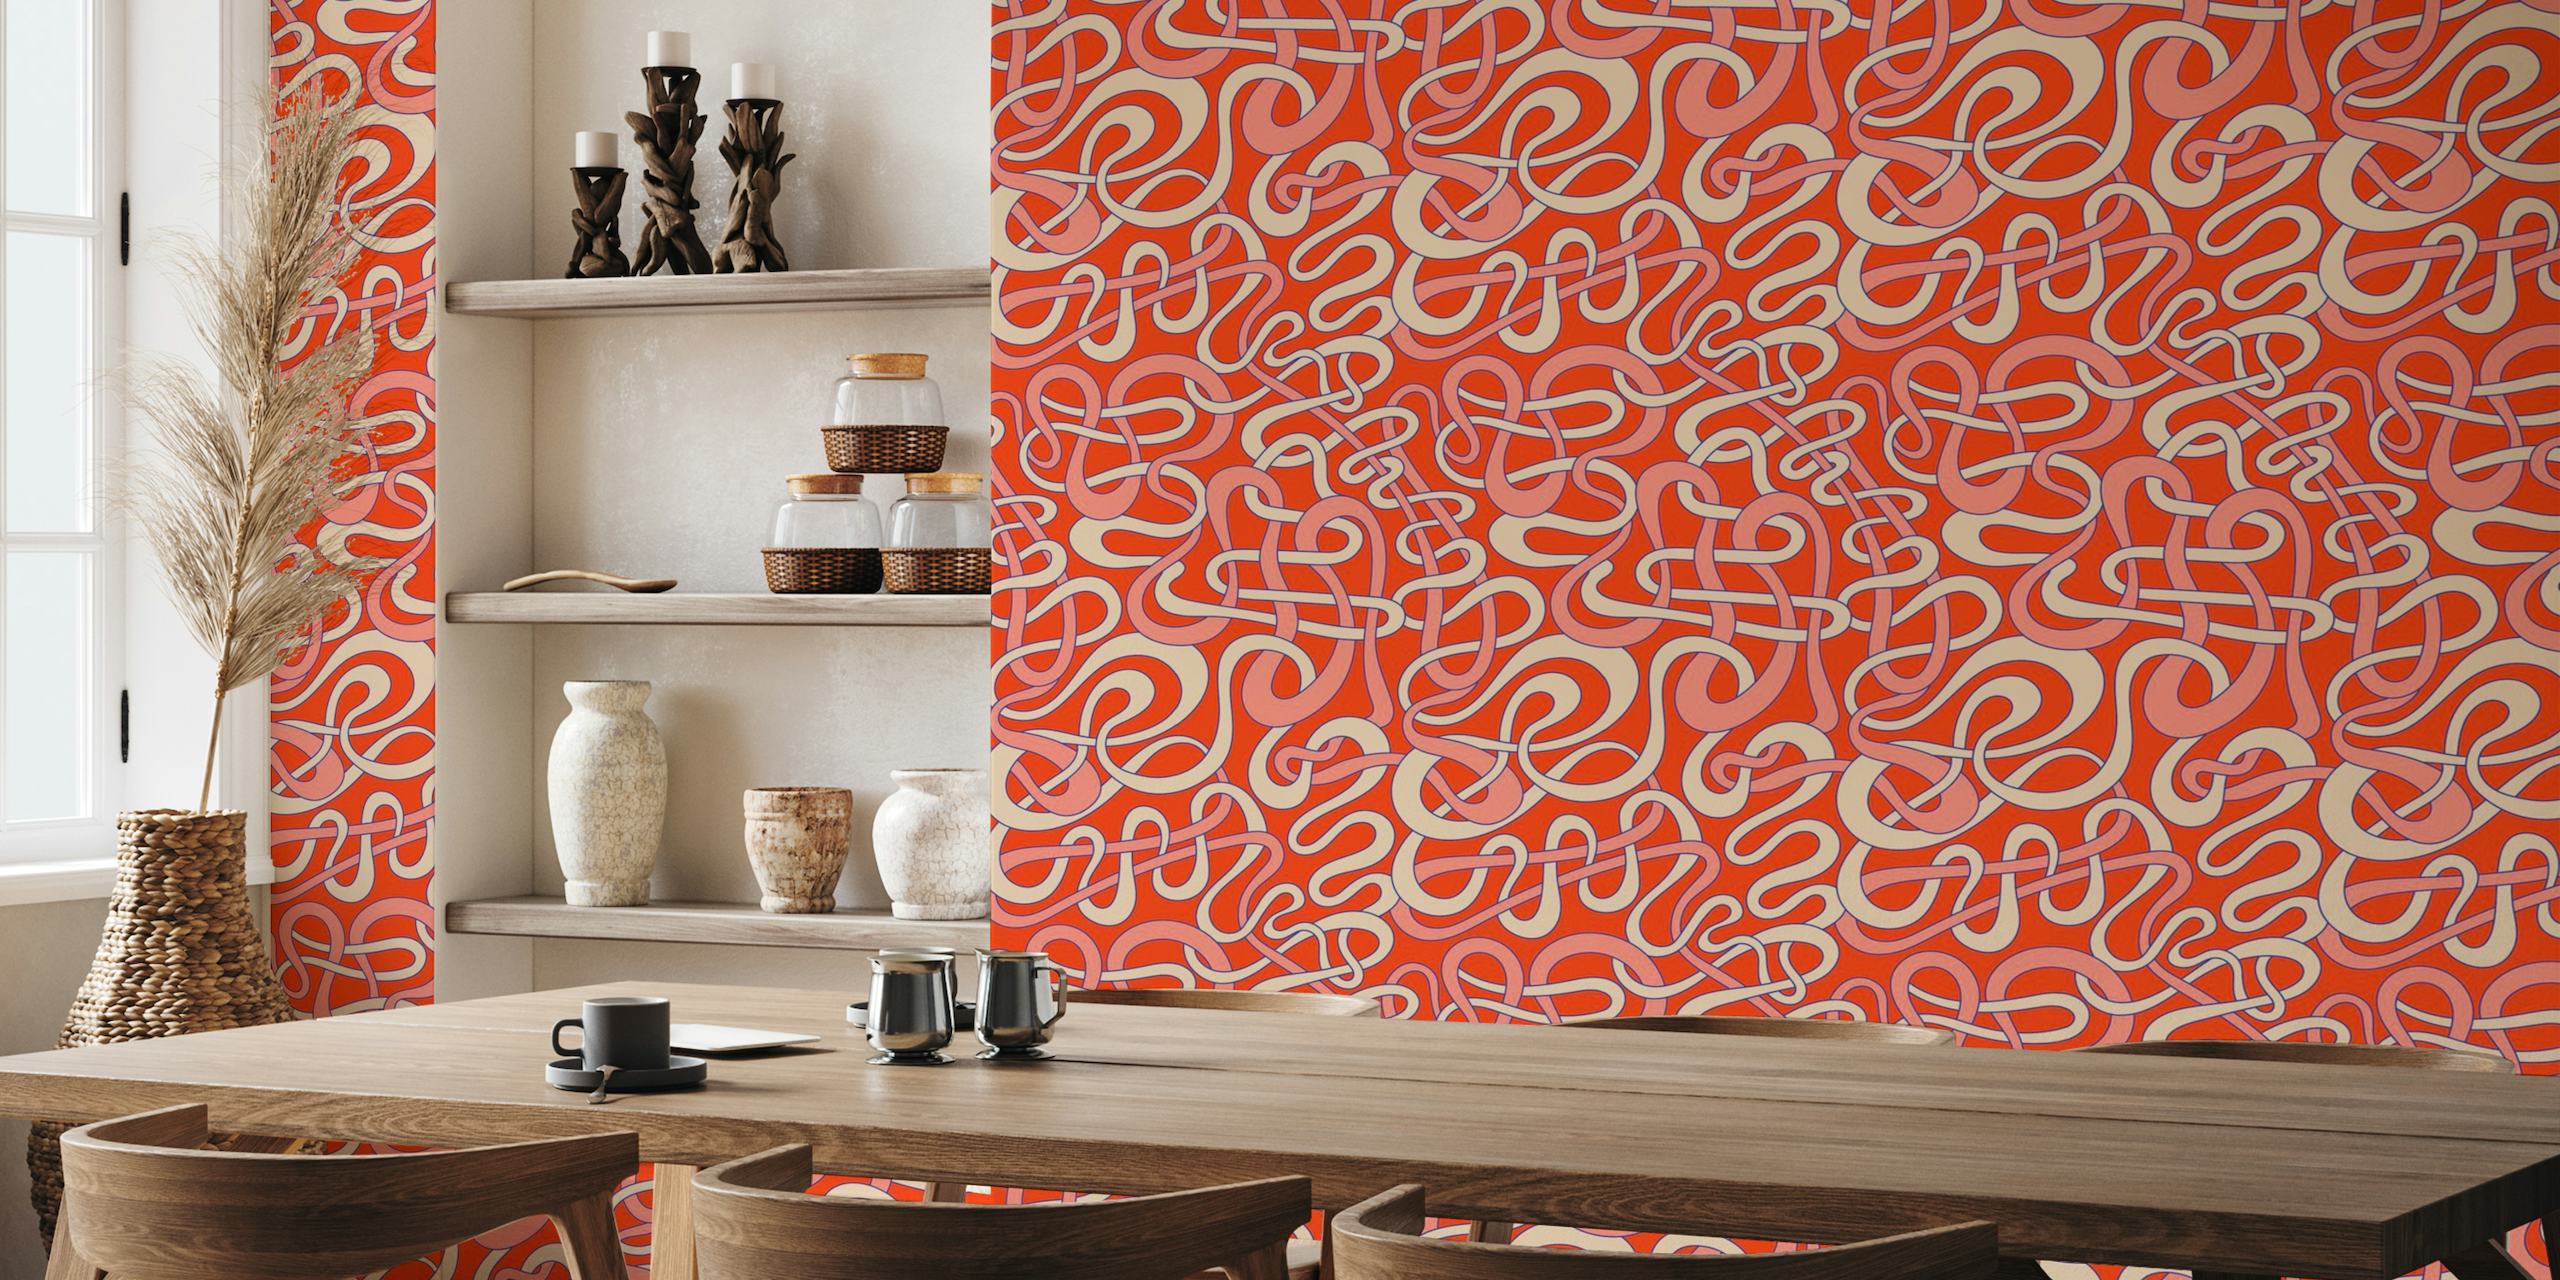 TANGLED STRIPES Abstract Cream Blush Coral papel de parede